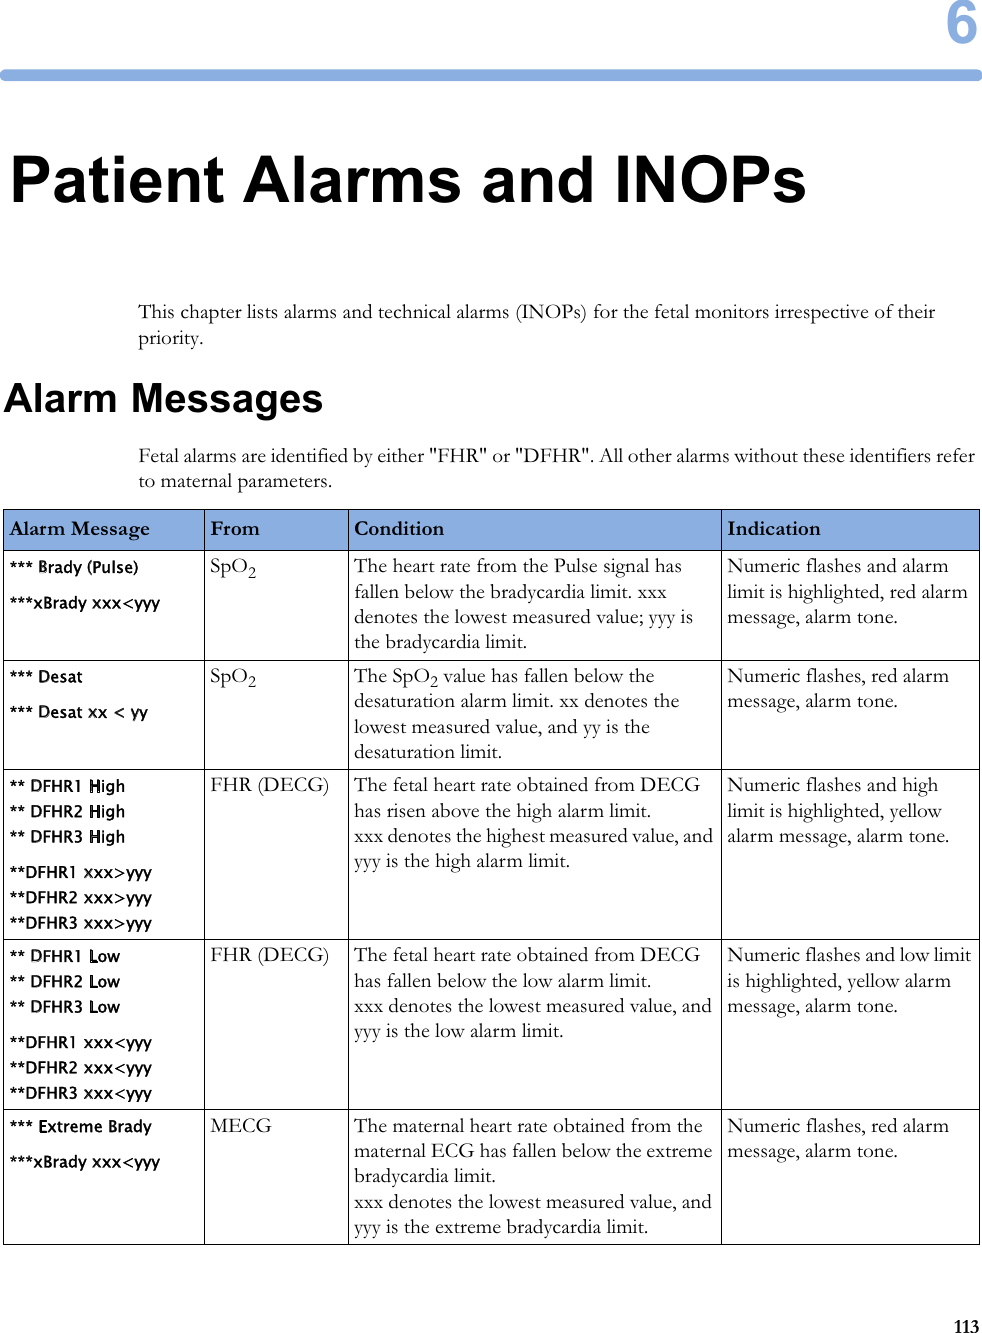 61136Patient Alarms and INOPsThis chapter lists alarms and technical alarms (INOPs) for the fetal monitors irrespective of their priority.Alarm MessagesFetal alarms are identified by either &quot;FHR&quot; or &quot;DFHR&quot;. All other alarms without these identifiers refer to maternal parameters.Alarm Message From Condition Indication*** Brady (Pulse)***xBrady xxx&lt;yyySpO2The heart rate from the Pulse signal has fallen below the bradycardia limit. xxx denotes the lowest measured value; yyy is the bradycardia limit.Numeric flashes and alarm limit is highlighted, red alarm message, alarm tone.*** Desat*** Desat xx &lt; yySpO2The SpO2 value has fallen below the desaturation alarm limit. xx denotes the lowest measured value, and yy is the desaturation limit.Numeric flashes, red alarm message, alarm tone.** DFHR1 High ** DFHR2 High ** DFHR3 High**DFHR1 xxx&gt;yyy **DFHR2 xxx&gt;yyy **DFHR3 xxx&gt;yyyFHR (DECG) The fetal heart rate obtained from DECG has risen above the high alarm limit. xxx denotes the highest measured value, and yyy is the high alarm limit.Numeric flashes and high limit is highlighted, yellow alarm message, alarm tone.** DFHR1 Low ** DFHR2 Low ** DFHR3 Low**DFHR1 xxx&lt;yyy **DFHR2 xxx&lt;yyy **DFHR3 xxx&lt;yyyFHR (DECG) The fetal heart rate obtained from DECG has fallen below the low alarm limit. xxx denotes the lowest measured value, and yyy is the low alarm limit.Numeric flashes and low limit is highlighted, yellow alarm message, alarm tone.*** Extreme Brady***xBrady xxx&lt;yyyMECG The maternal heart rate obtained from the maternal ECG has fallen below the extreme bradycardia limit. xxx denotes the lowest measured value, and yyy is the extreme bradycardia limit.Numeric flashes, red alarm message, alarm tone.